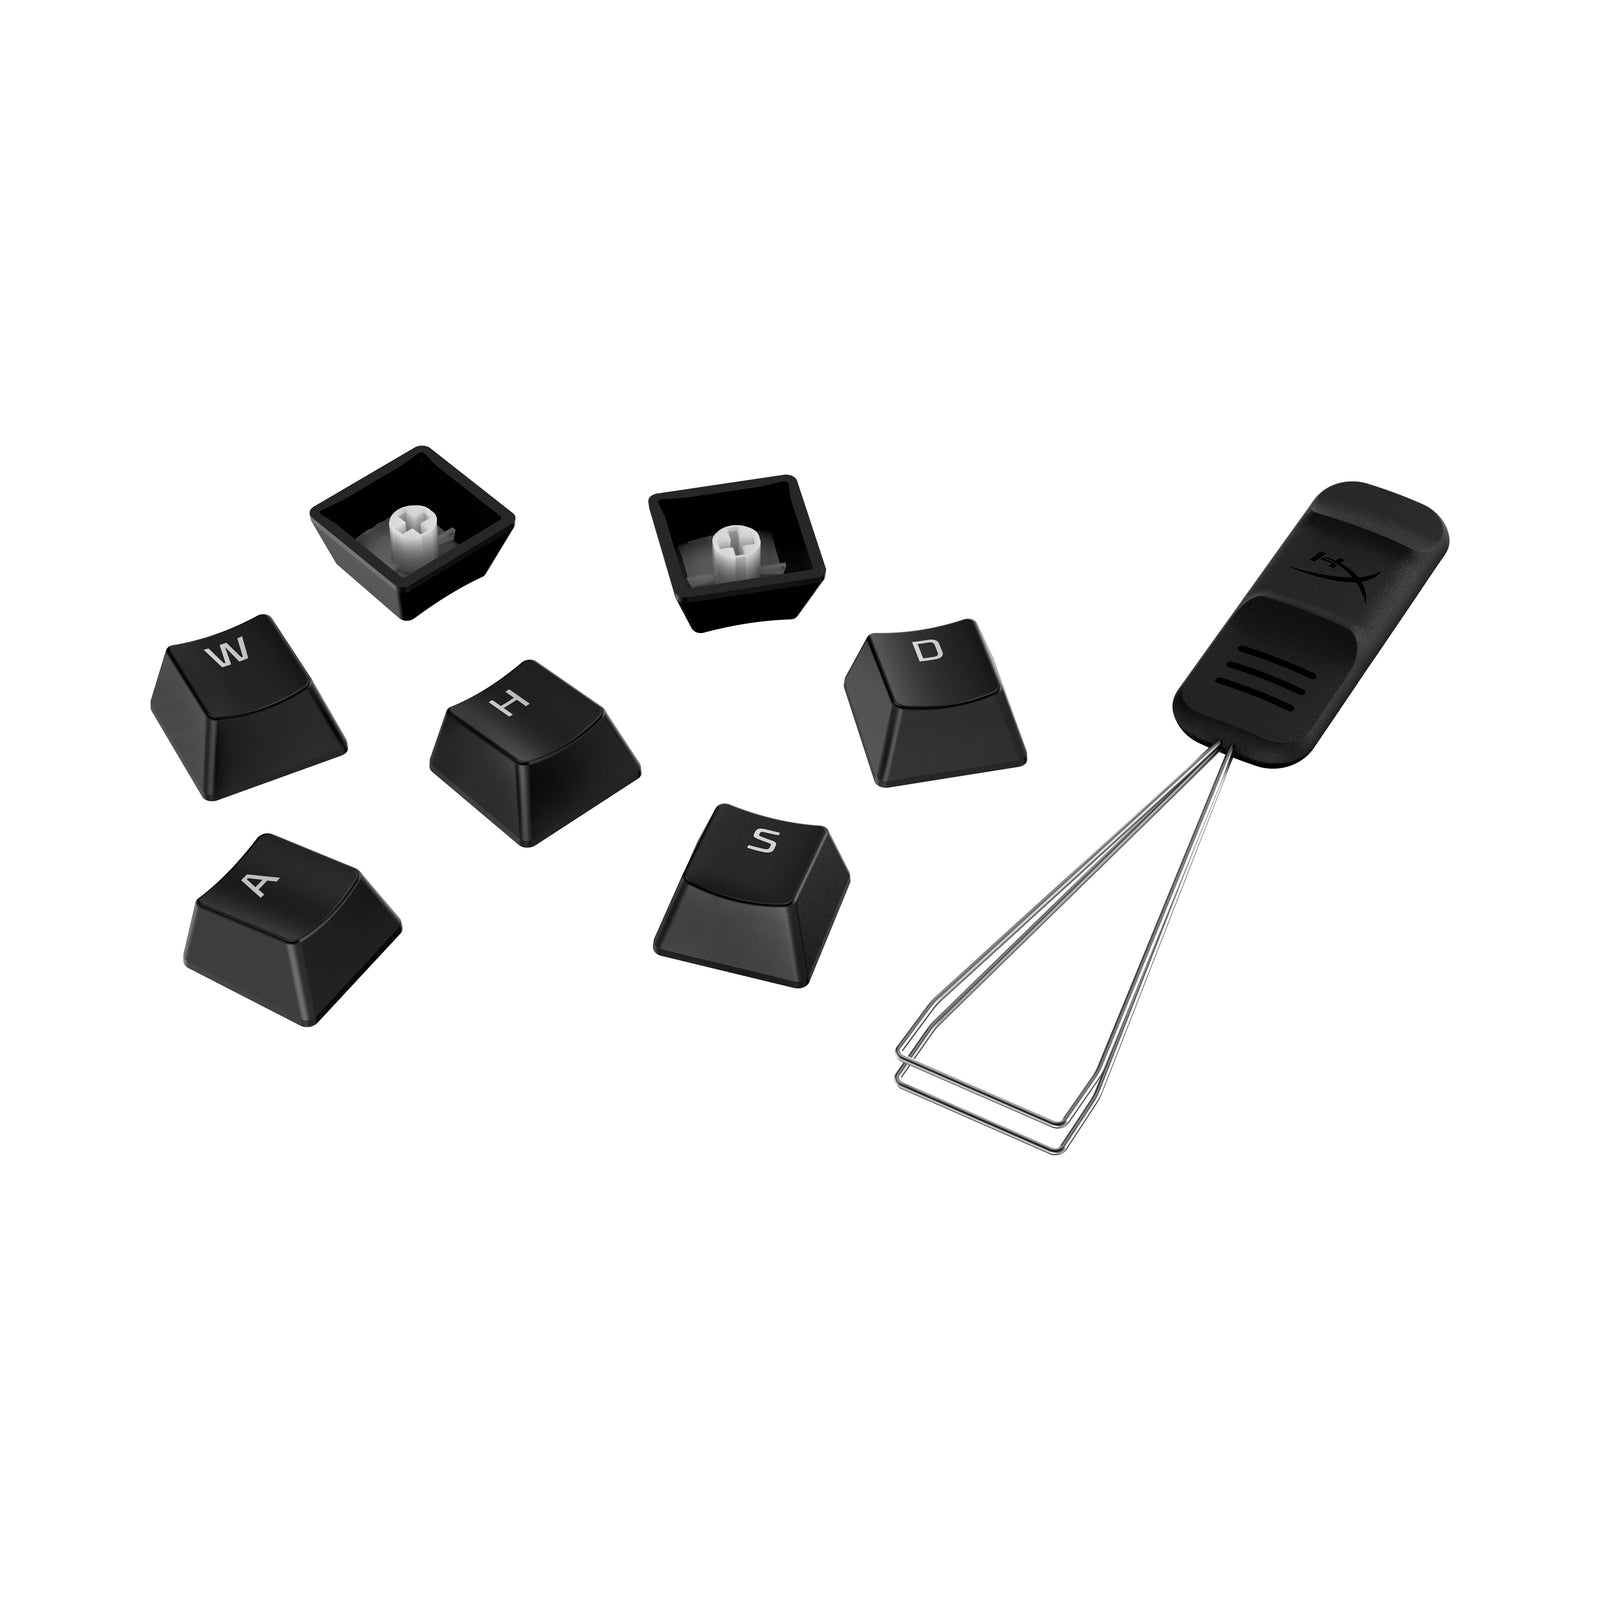 Durable PBT Keycaps for Mechanical Keyboards | HyperX